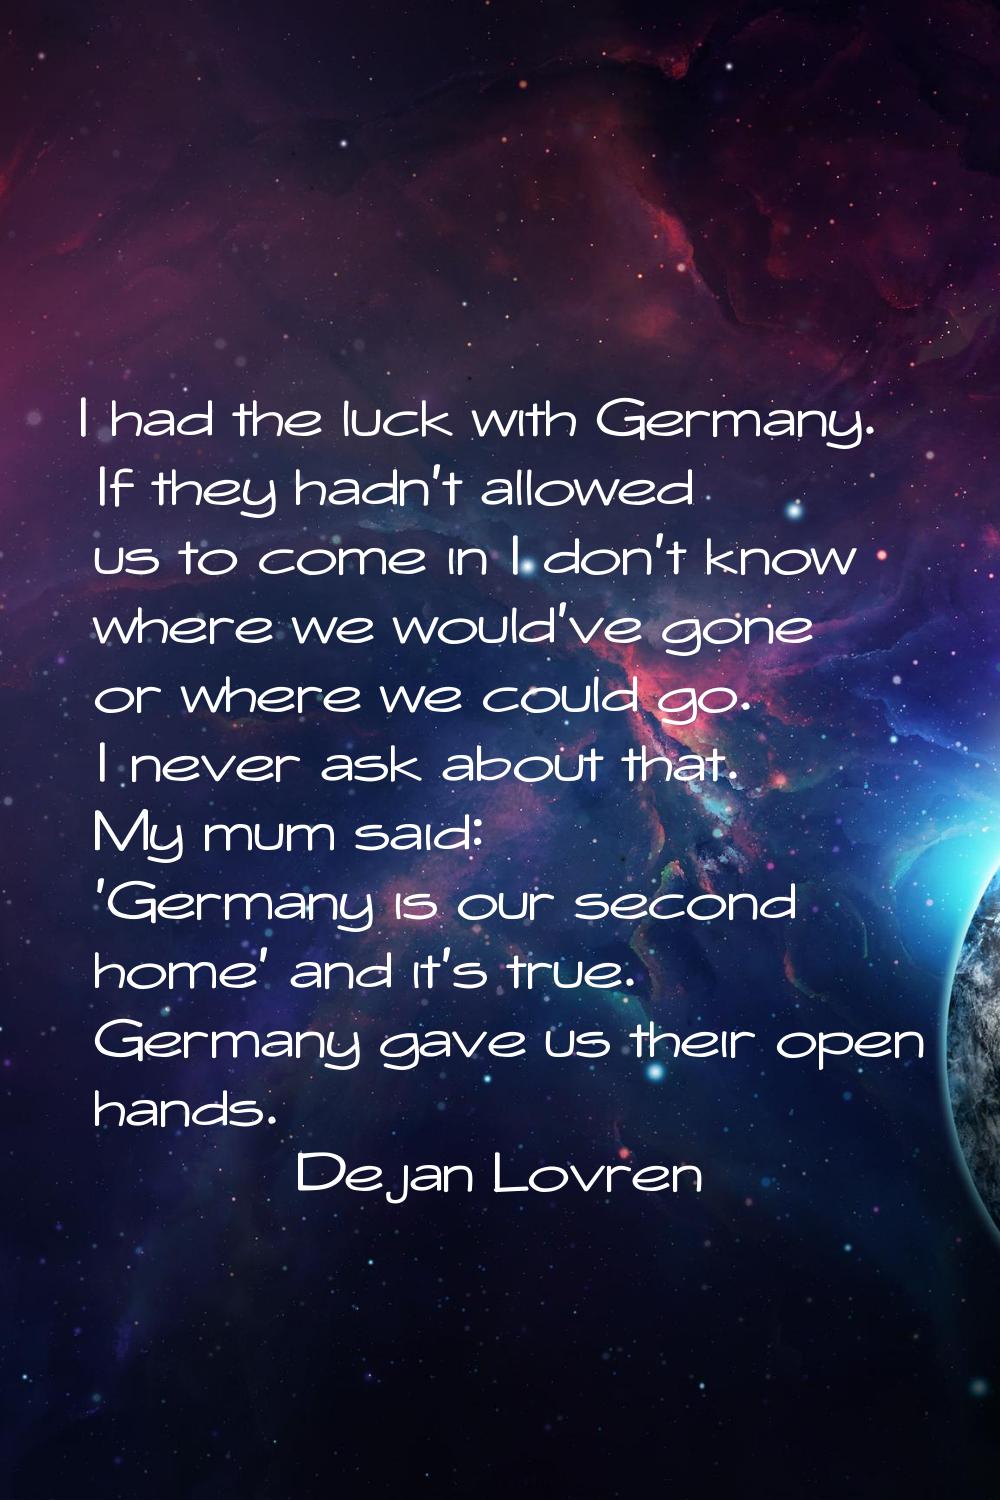 I had the luck with Germany. If they hadn't allowed us to come in I don't know where we would've go